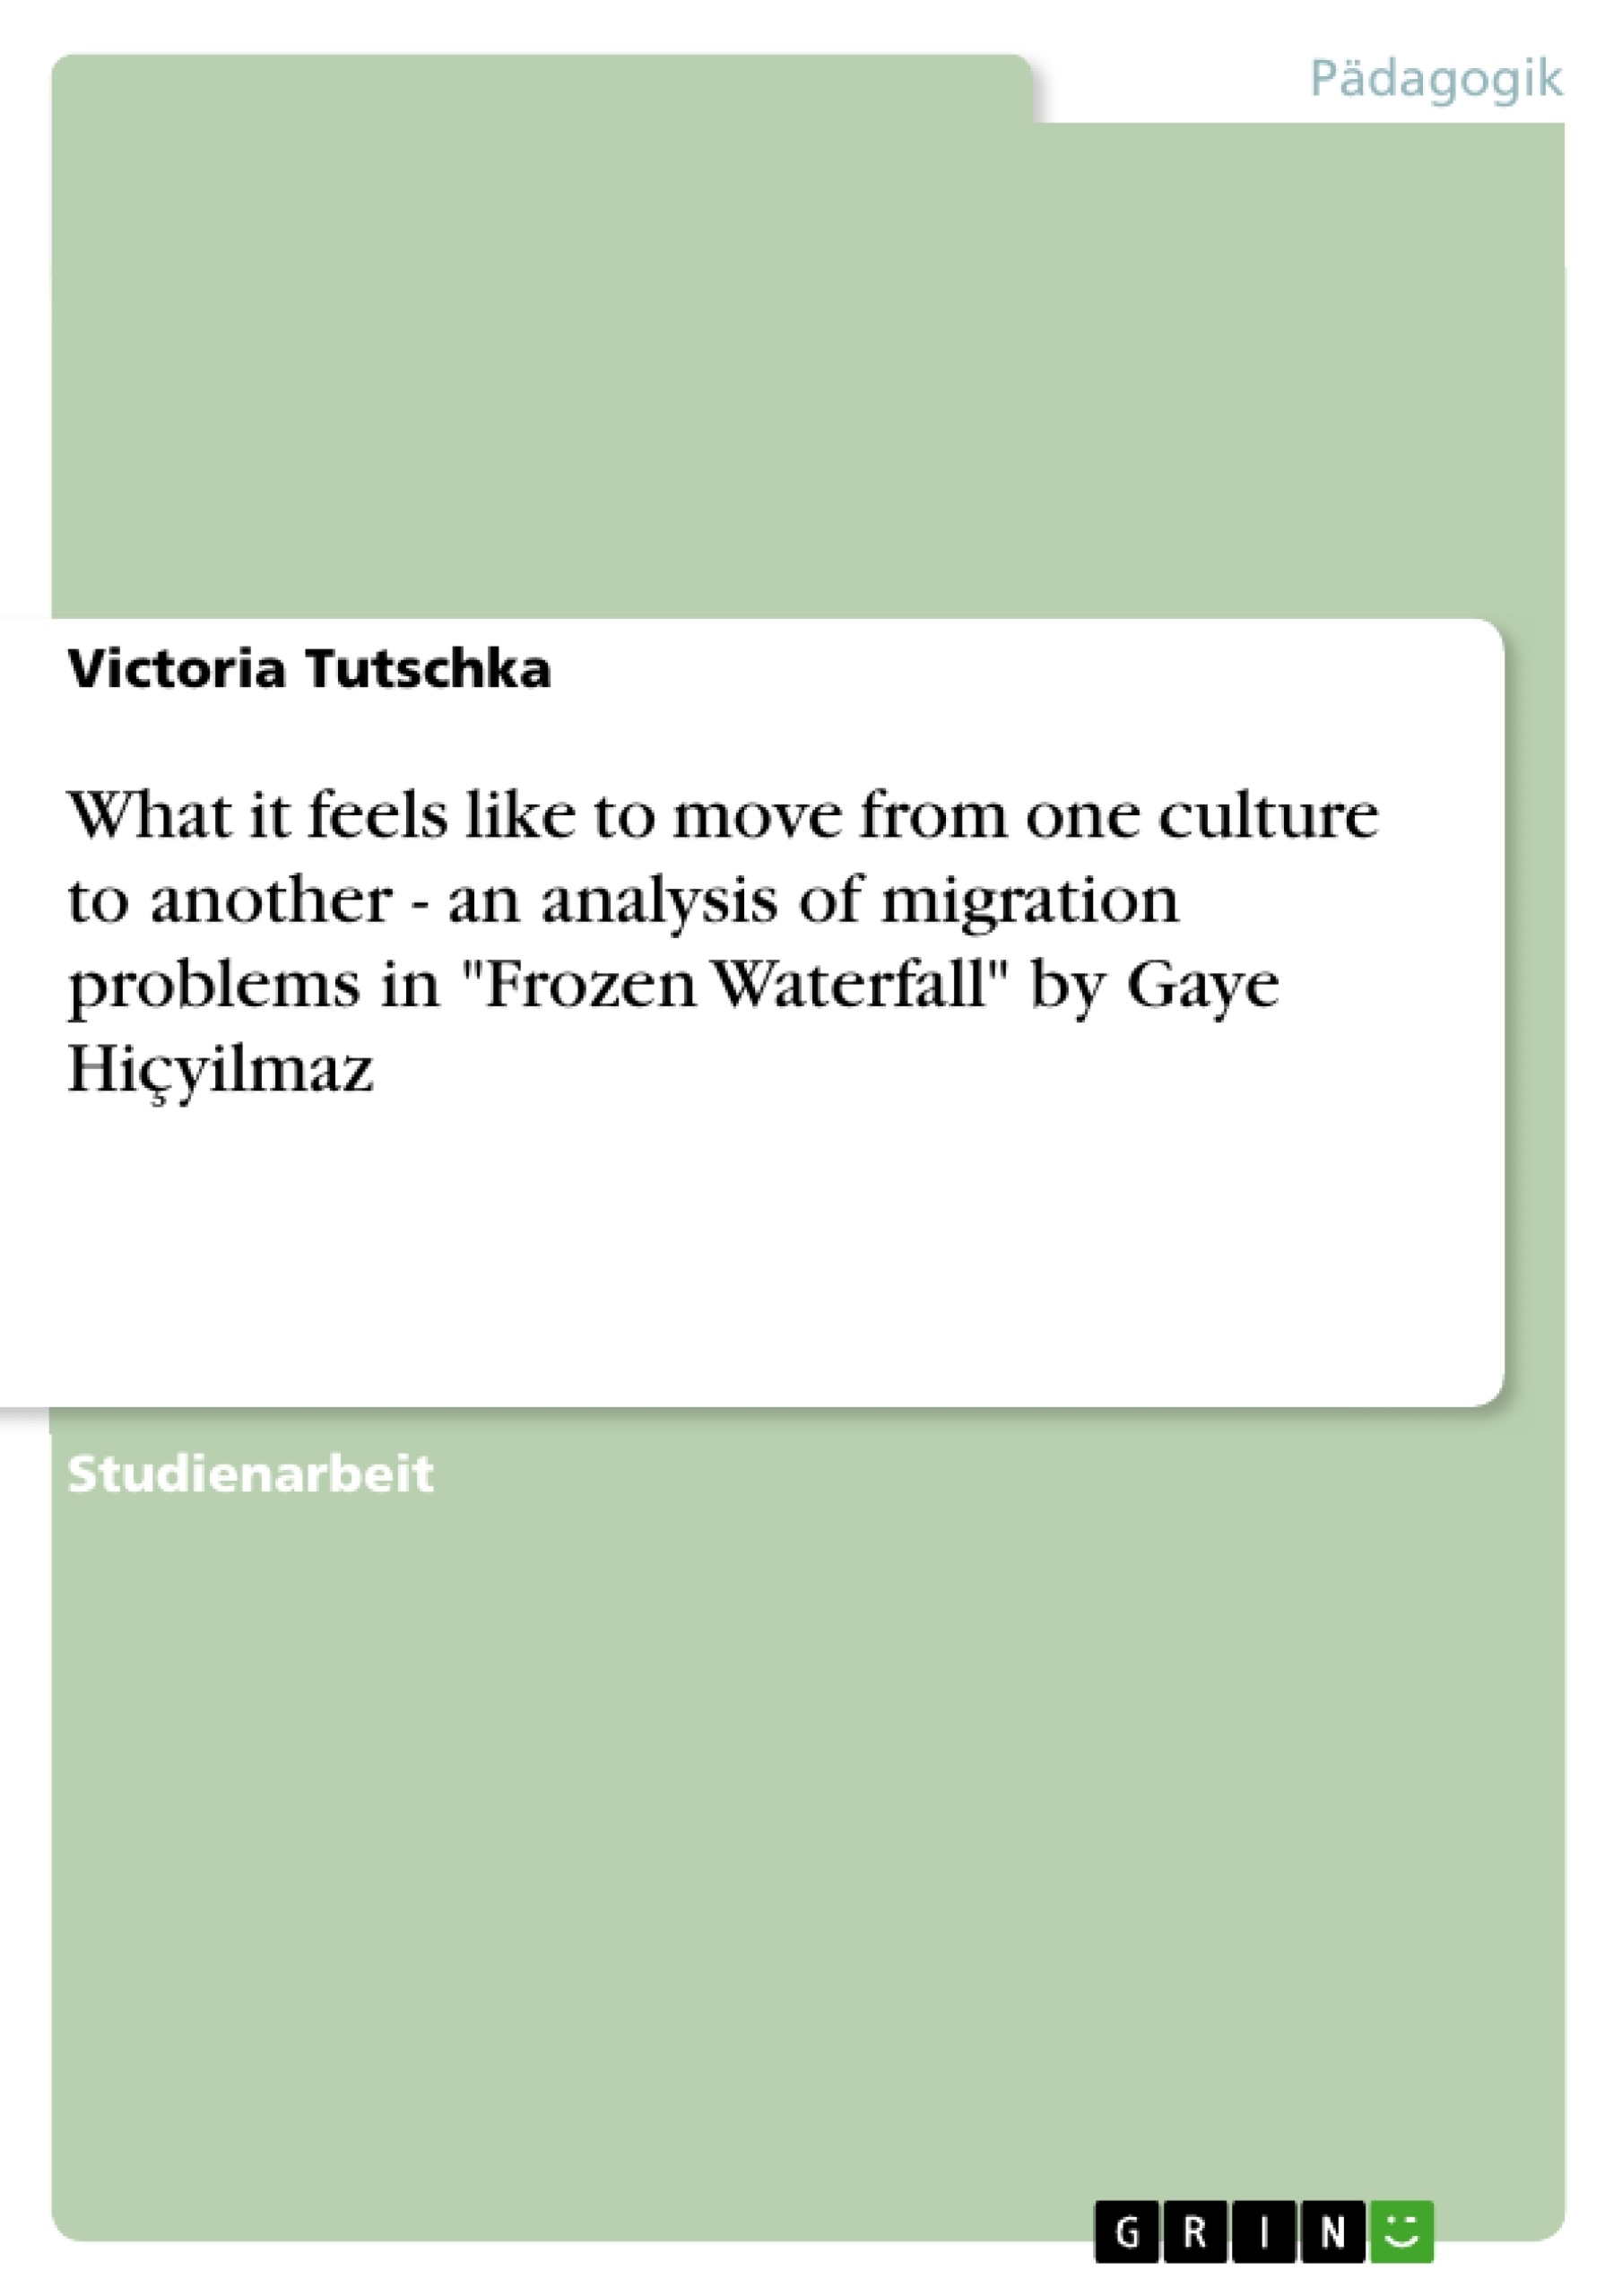 Titre: What it feels like to move from one culture to another - an analysis of migration problems in "Frozen Waterfall" by Gaye Hiçyilmaz